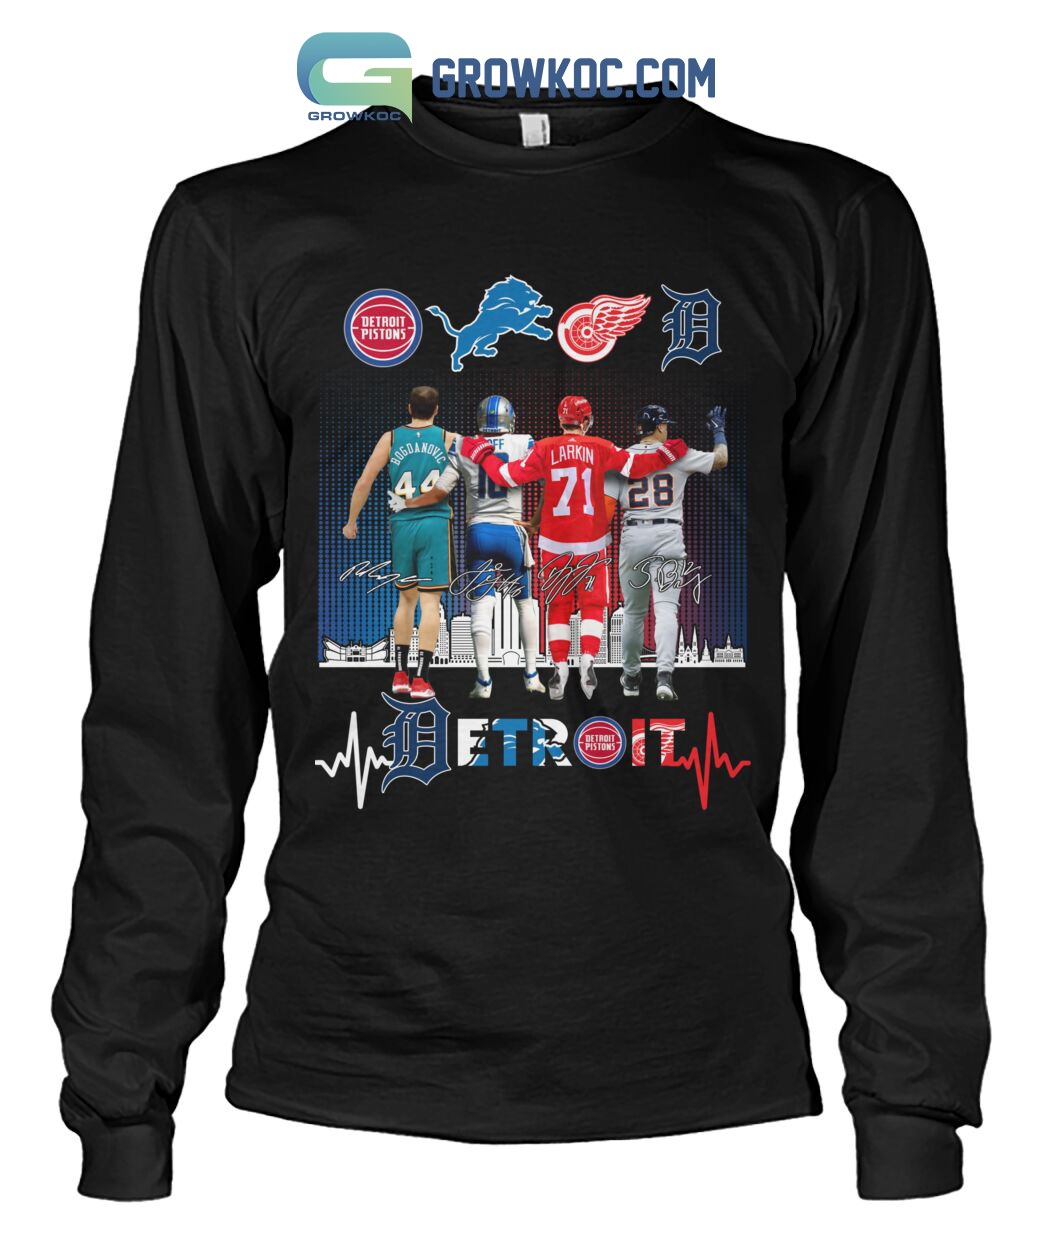 Detroit lions pistons red wings and tigers legend team shirt